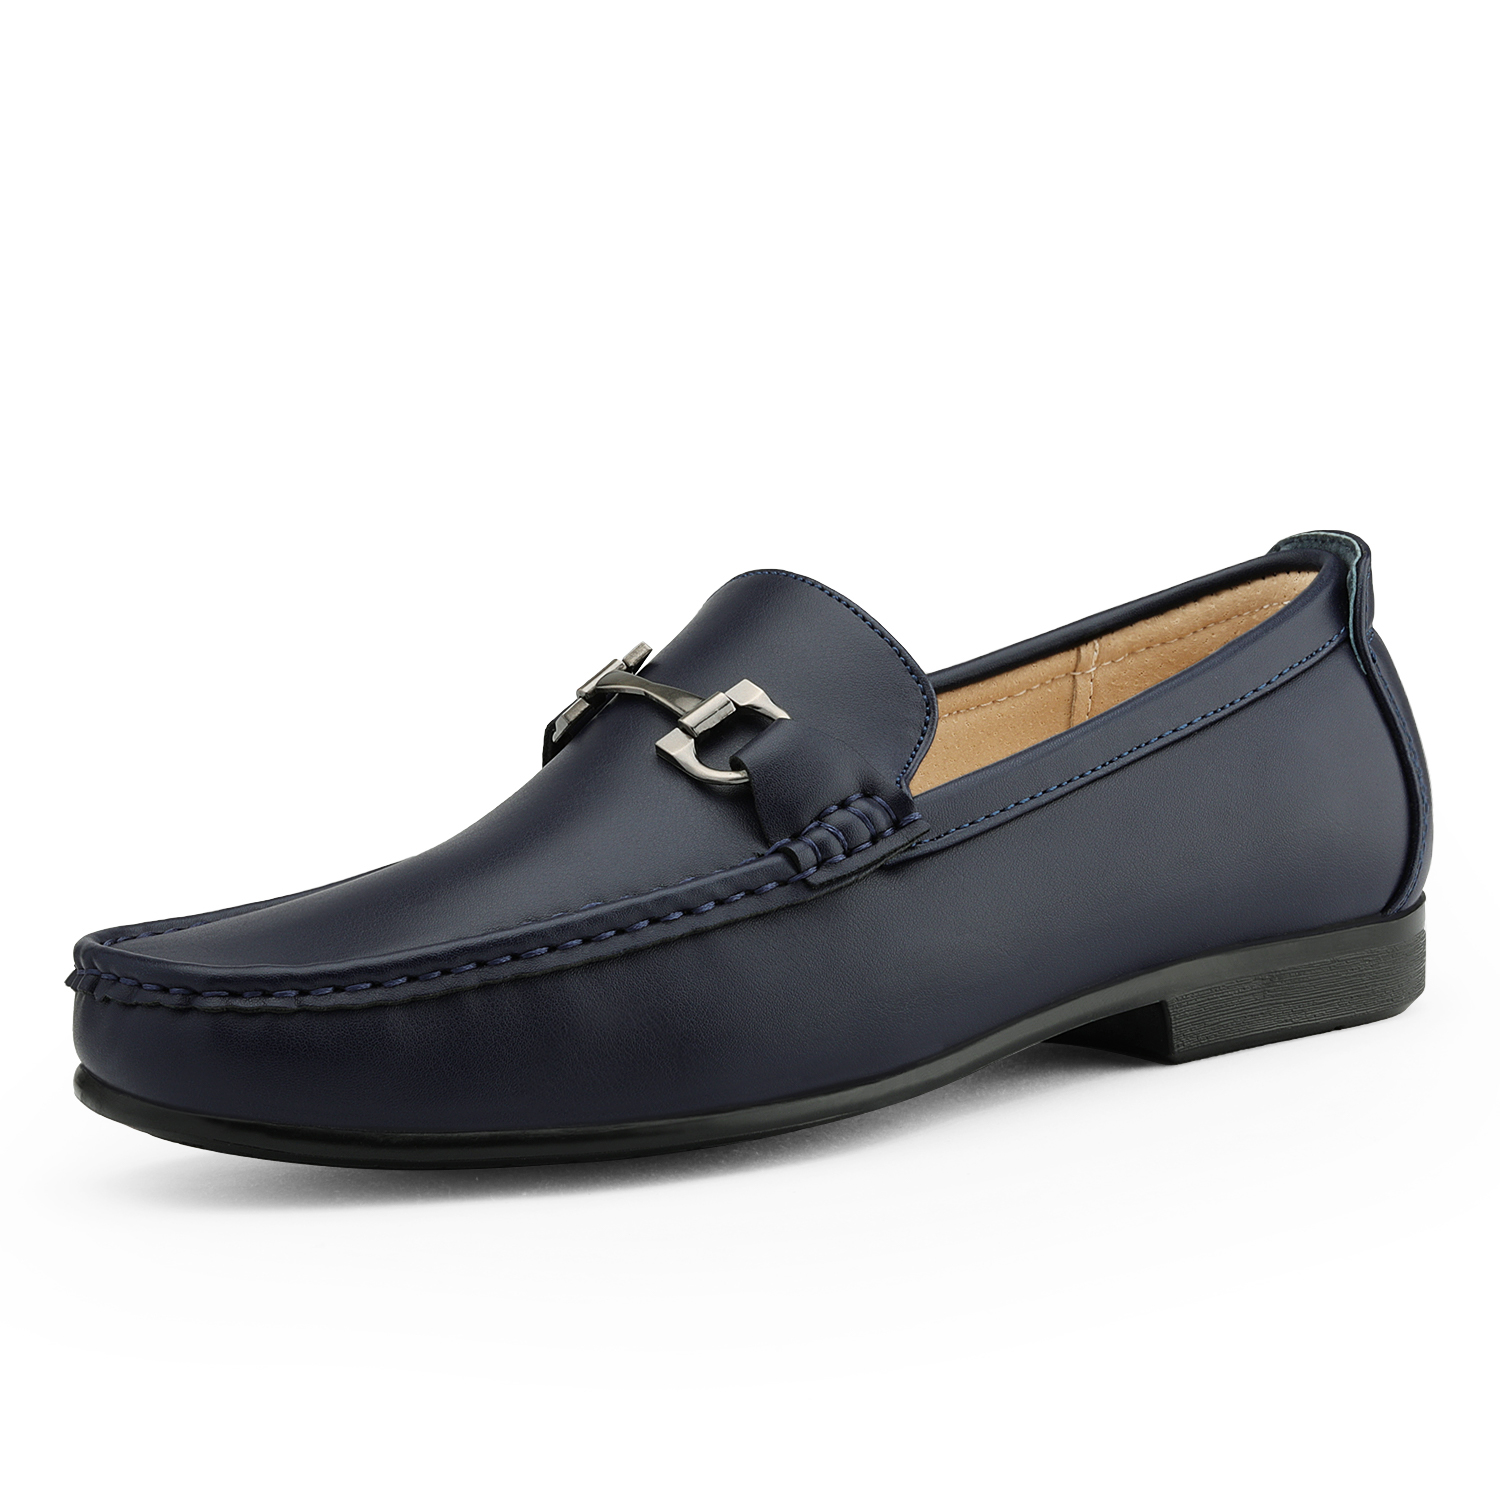 Bruno Marc Men's Moccasin Loafer Shoes Men Dress Loafers Slip On Casual Penny Comfort Outdoor Loafers HENRY-1 NAVY Size 7.5 - image 1 of 5